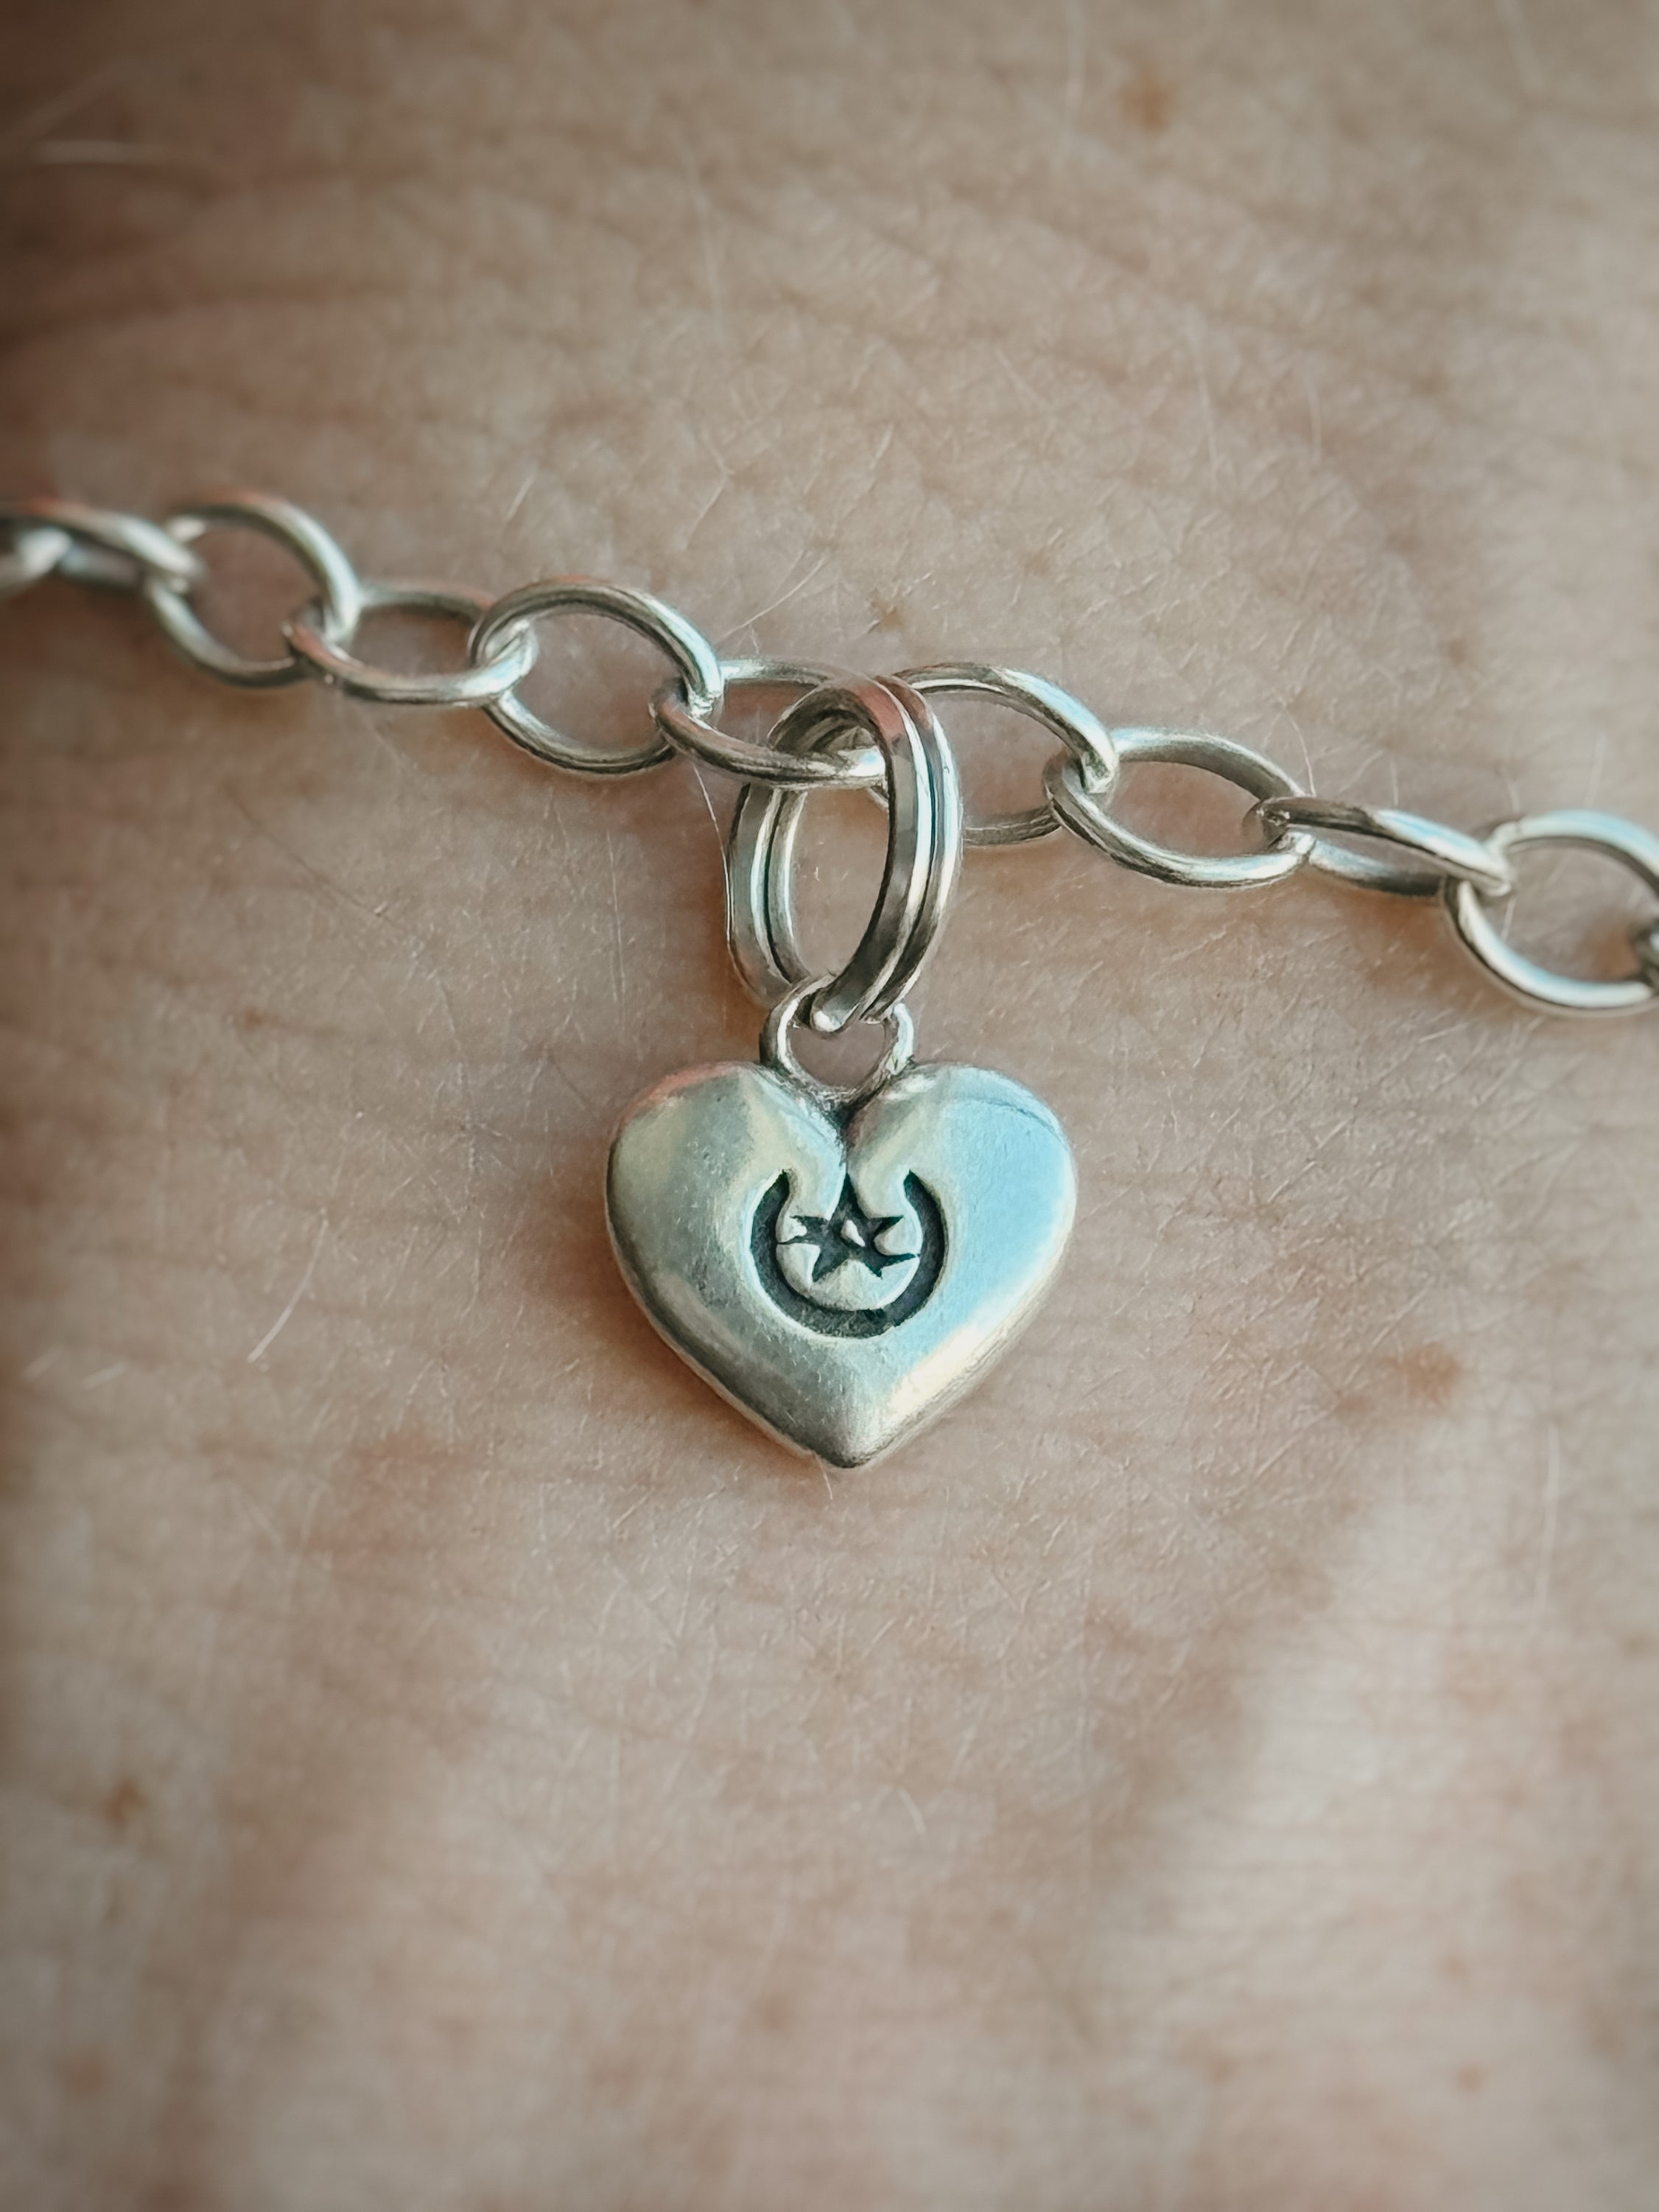 A Marshall - Above All Charm Bracelet (with Be Kind charm)